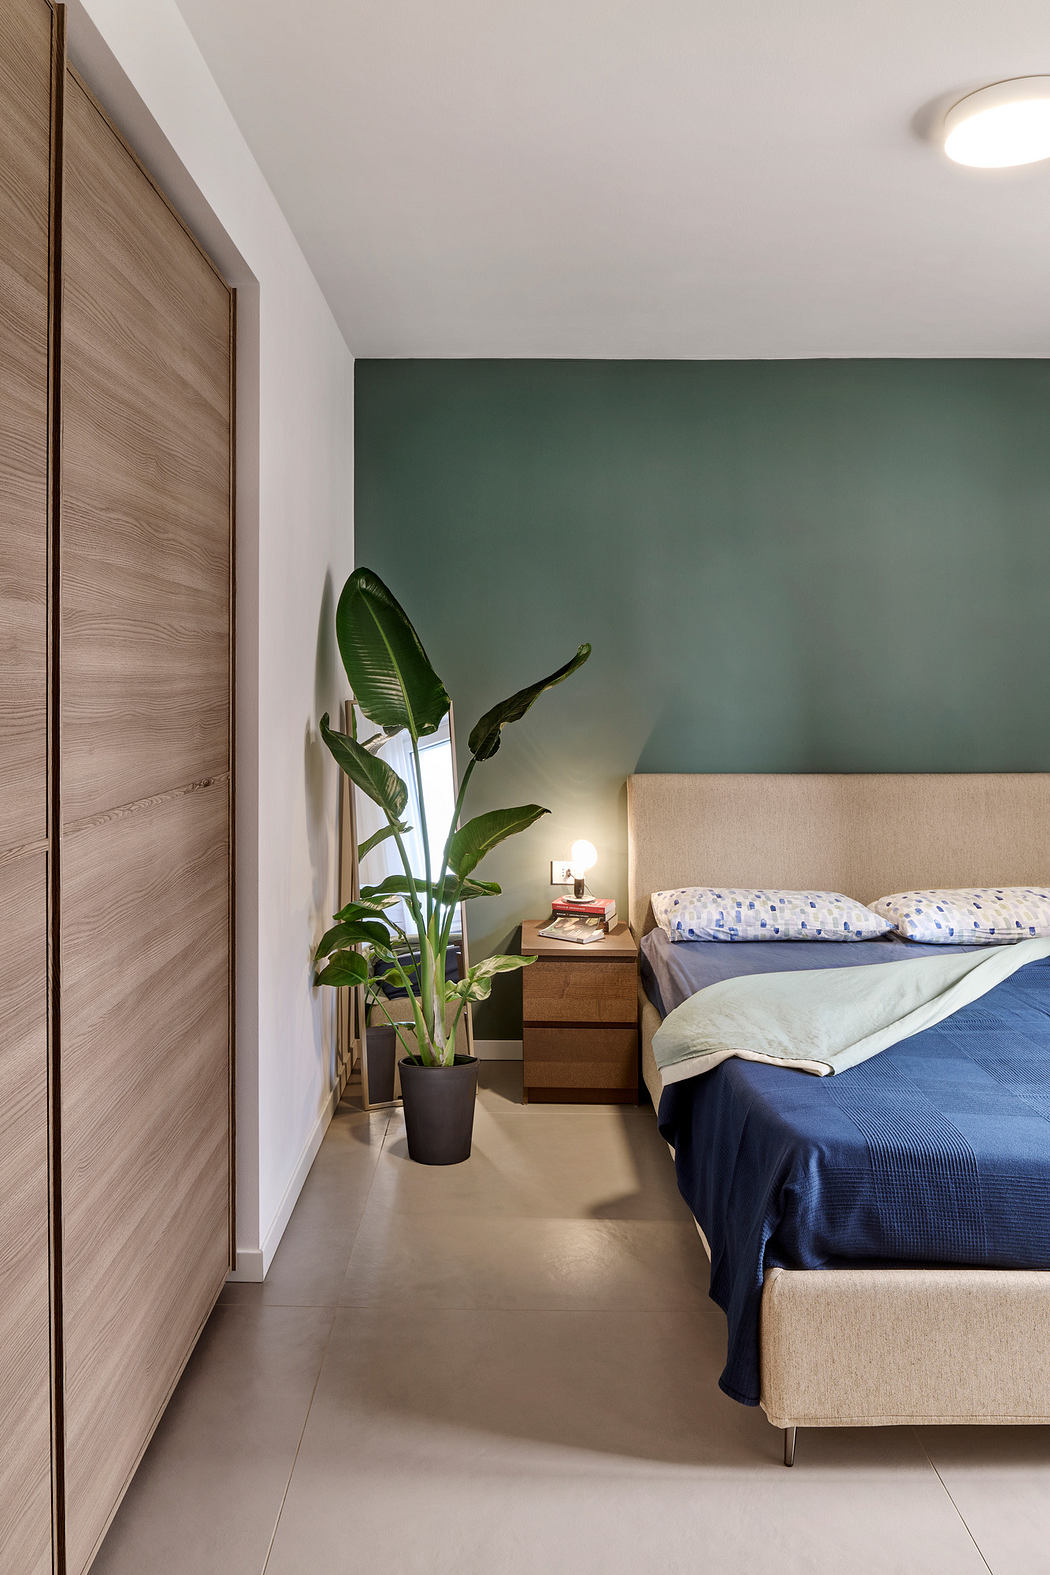 Contemporary bedroom with teal accent wall, large plant, and beige bed.